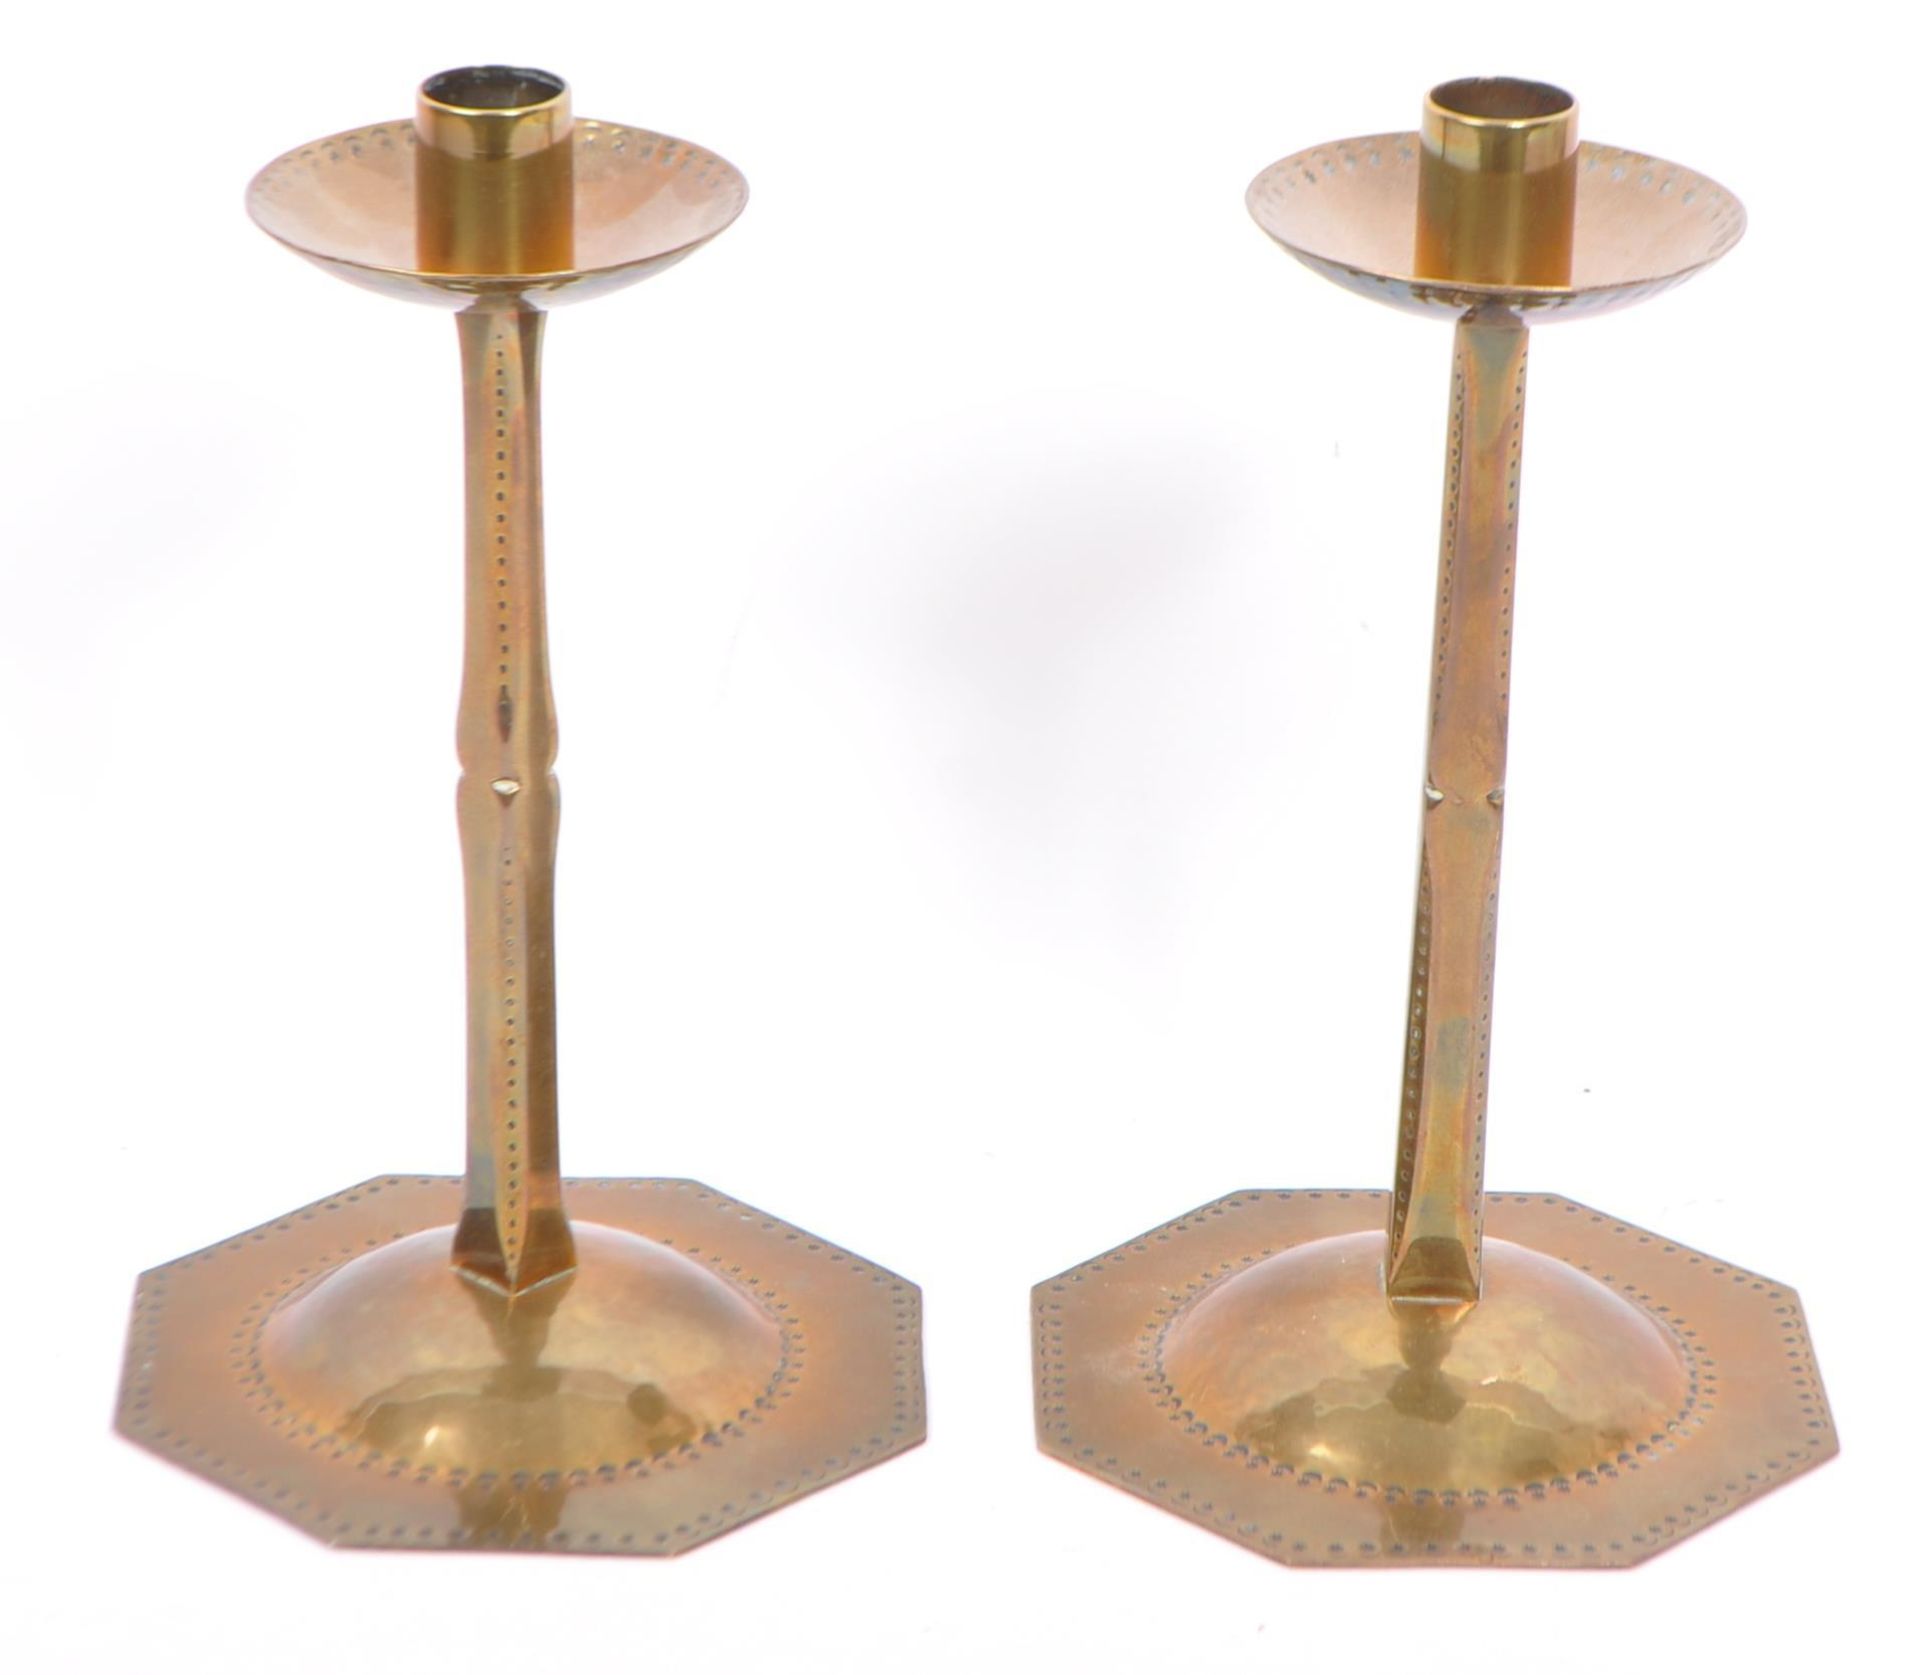 MATCHING PAIR OF MID CENTURY BRASS CANDLE STICK HOLDERS - Image 2 of 5